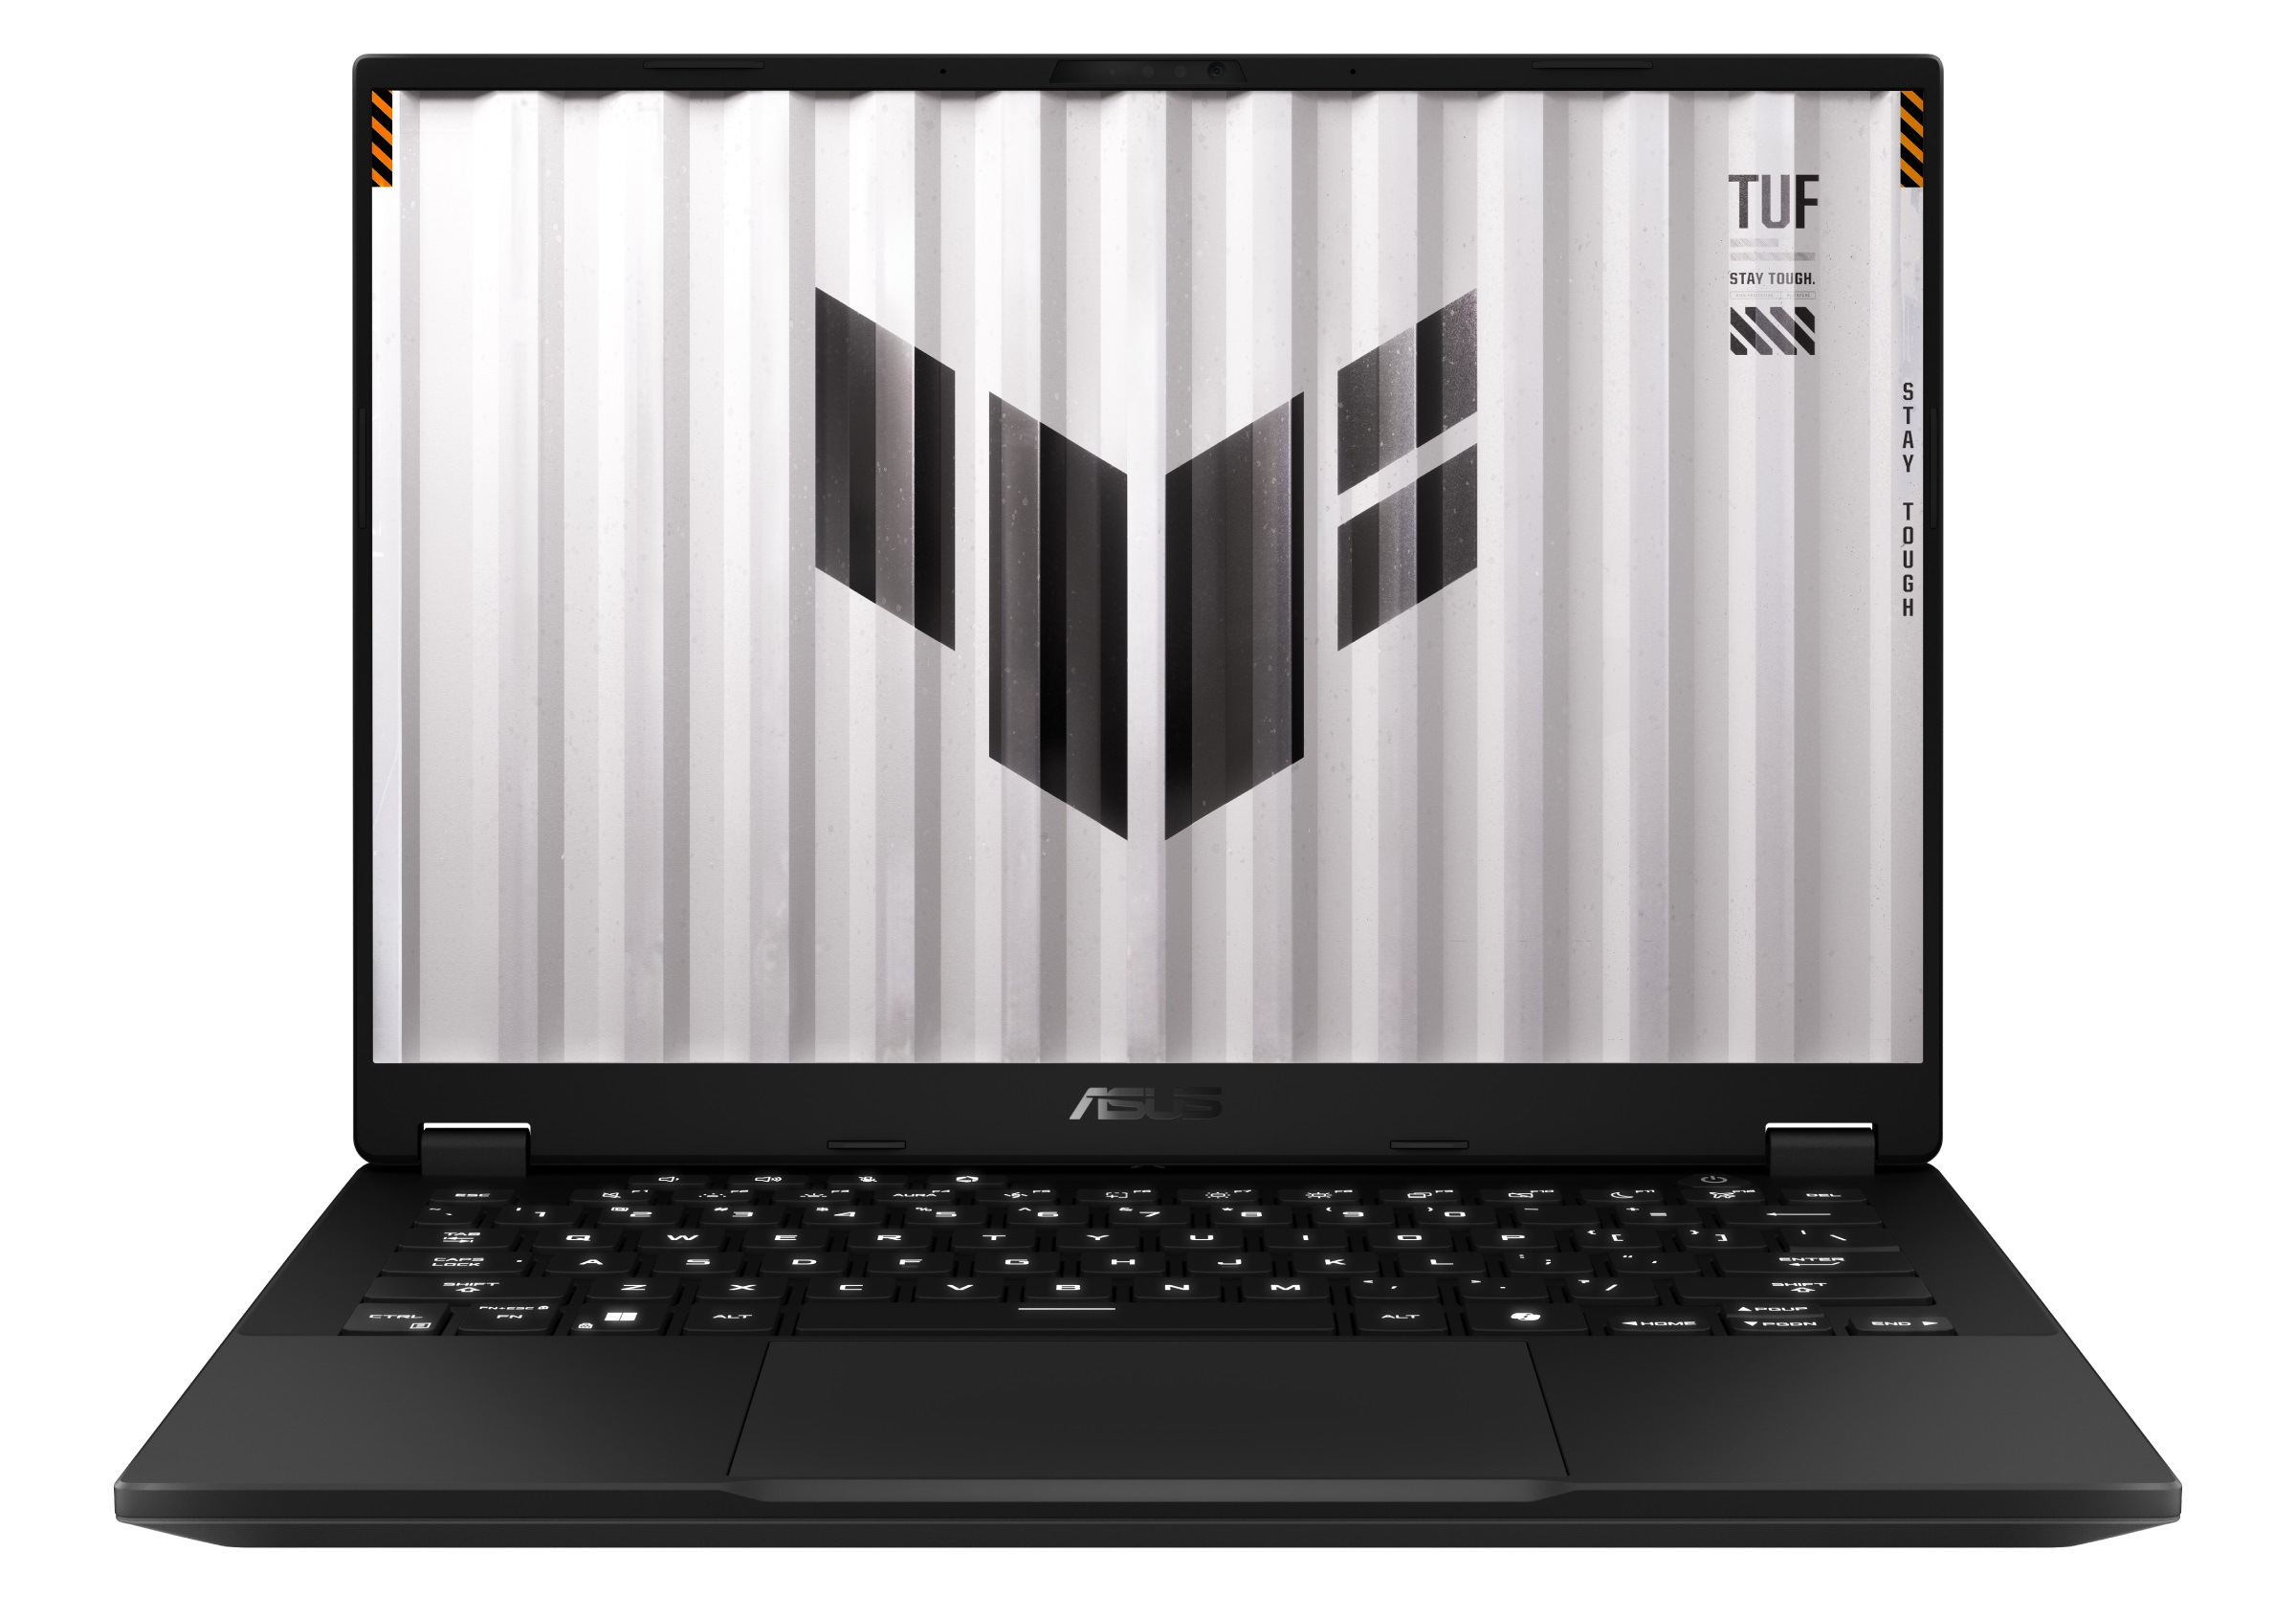 The Asus TUF Gaming A14 FA401 notebook